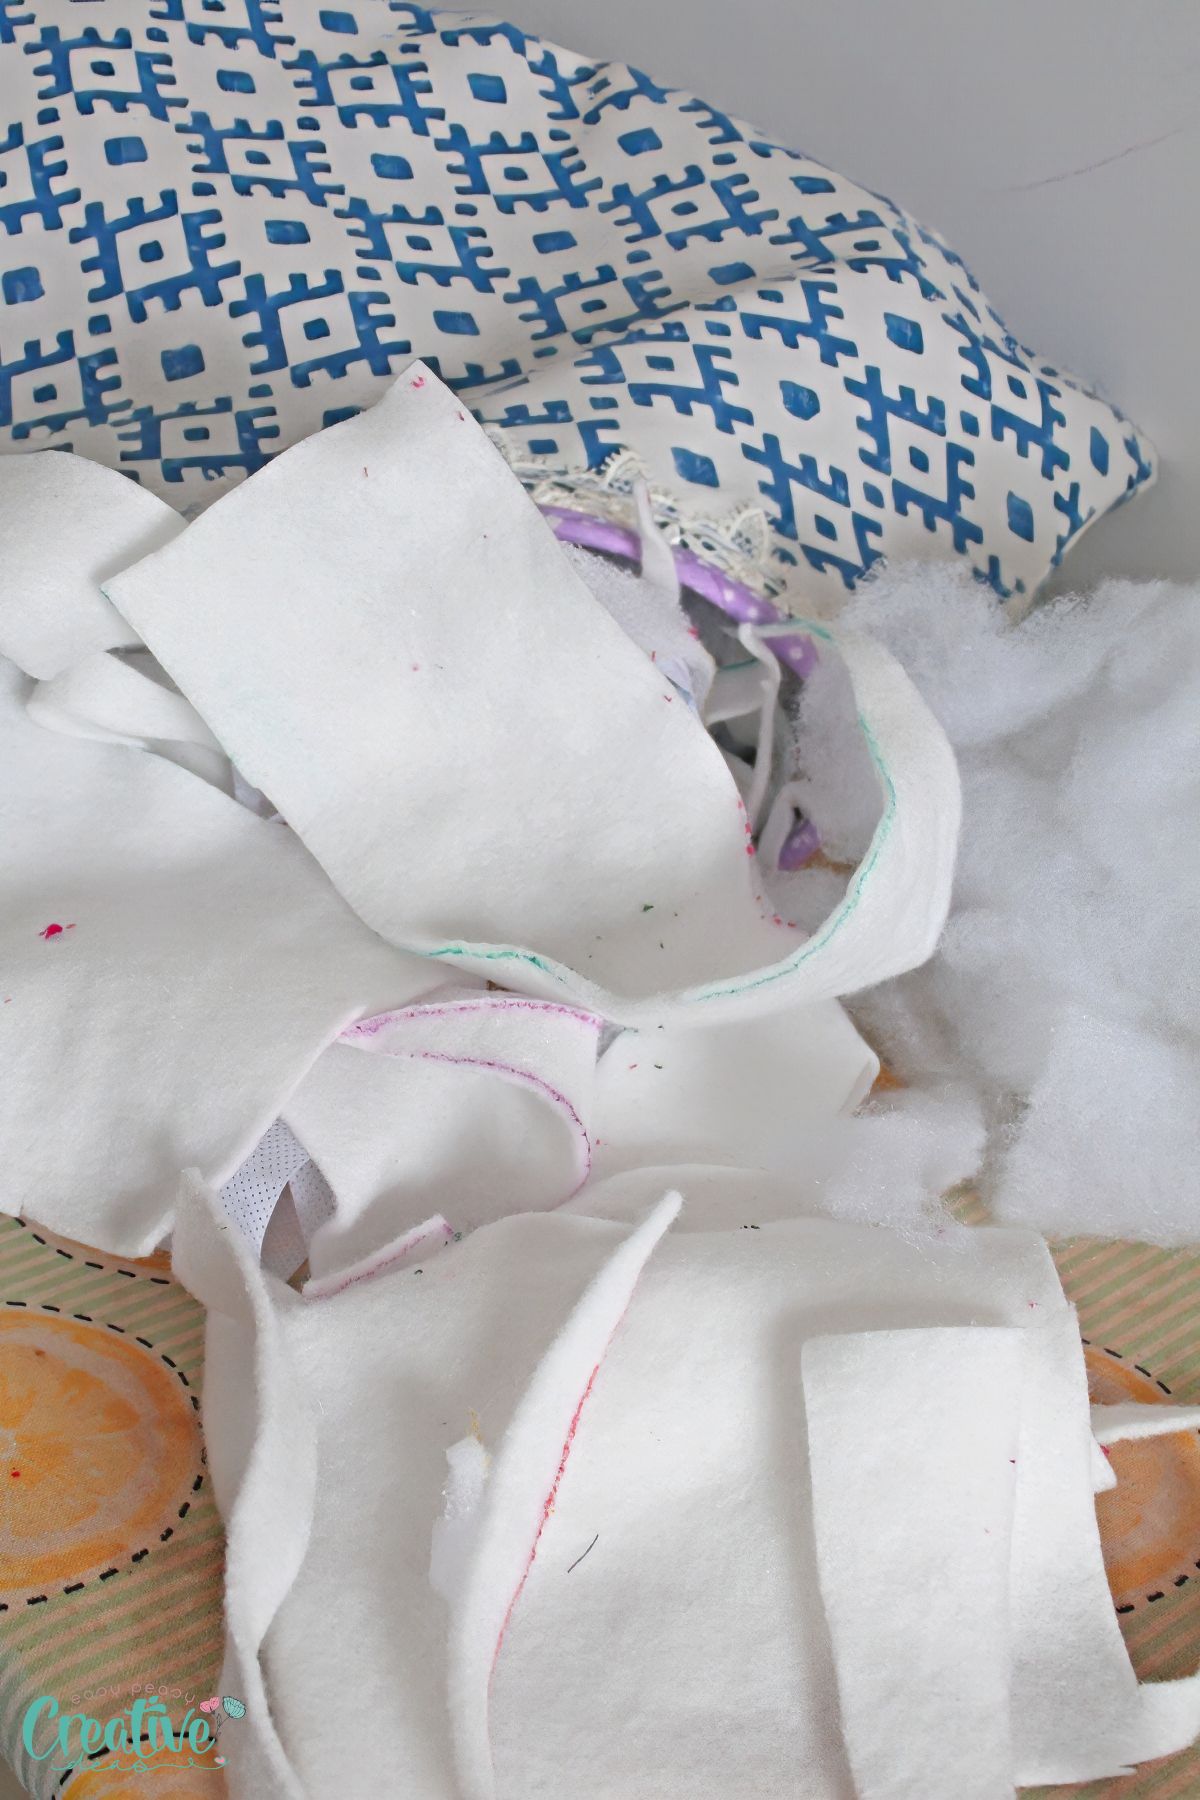 Give your batting a new life: What to do with batting scraps from old quilting projects